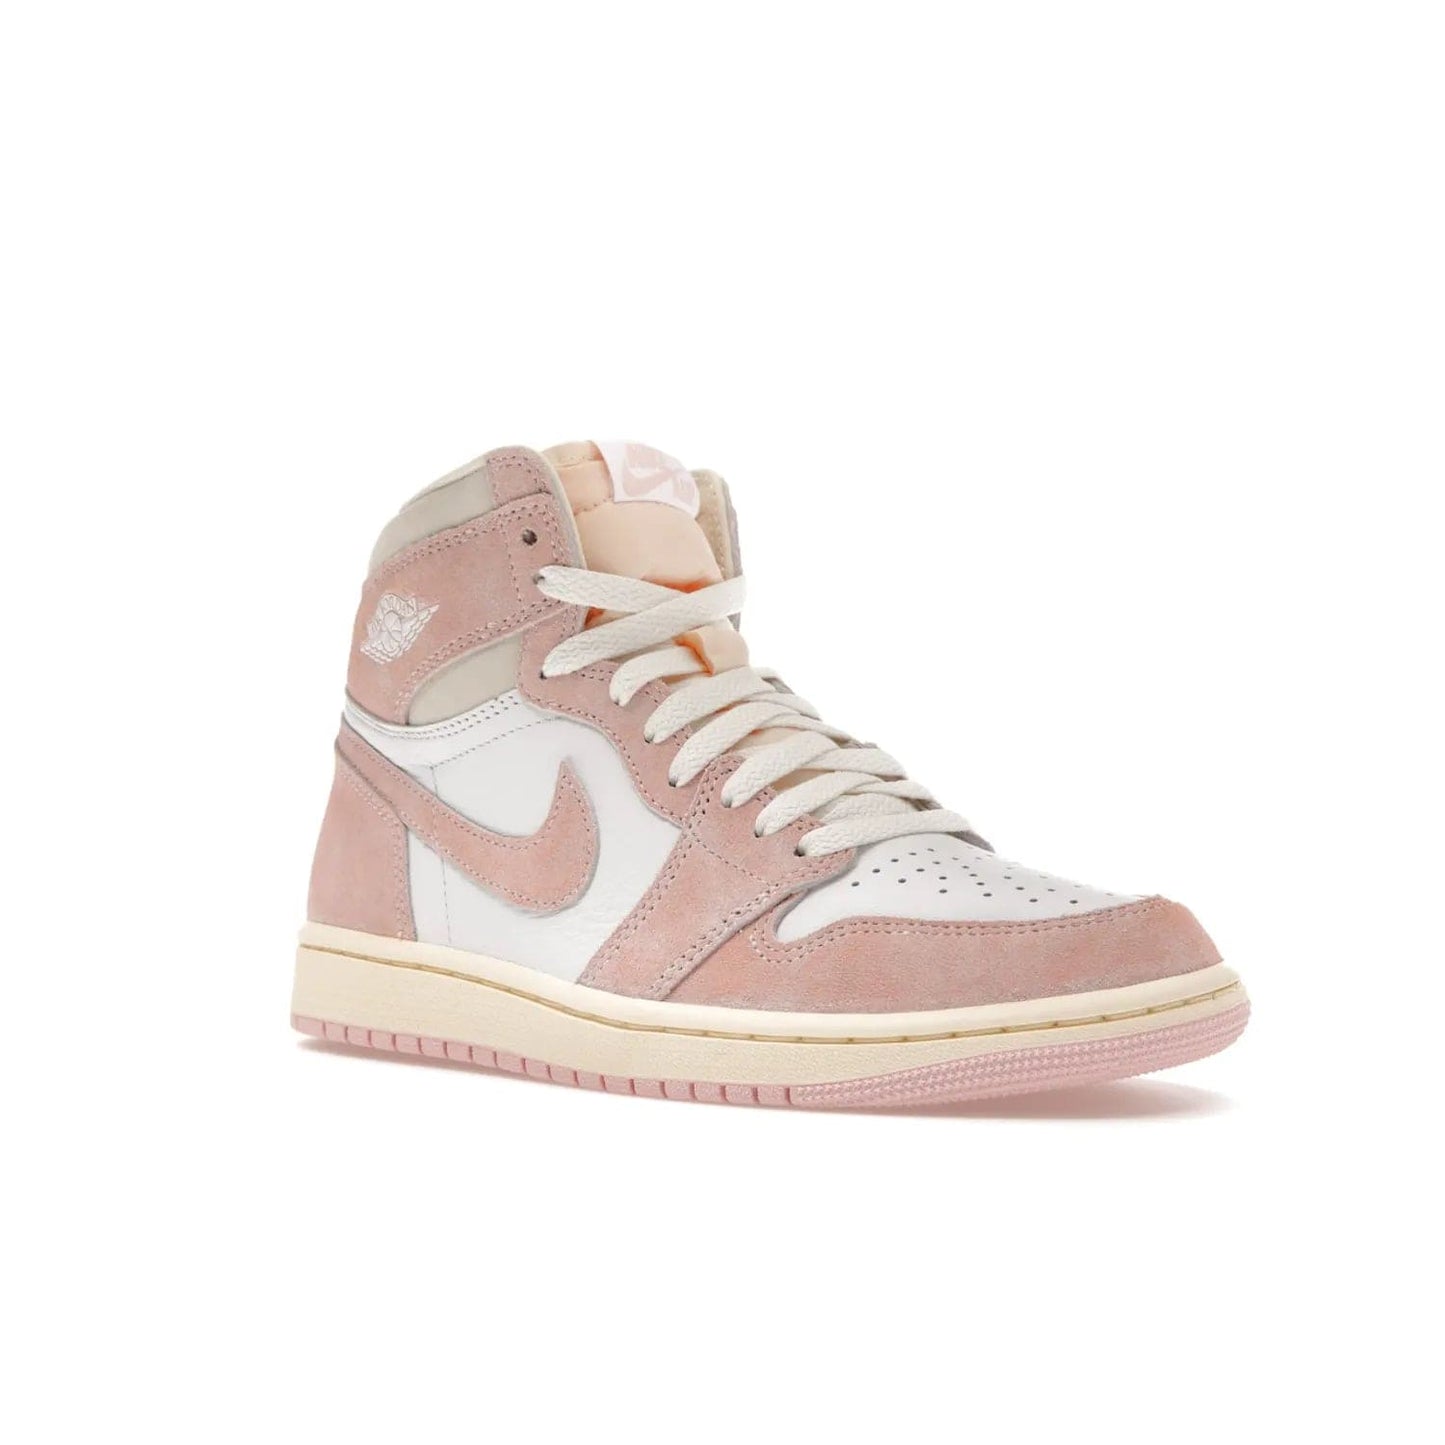 Jordan 1 Retro High OG Washed Pink (Women's) - Image 5 - Only at www.BallersClubKickz.com - Iconic Air Jordan 1 Retro High OG for women with unique pink suede and white leather uppers. Get the timeless look on April 22, 2023.